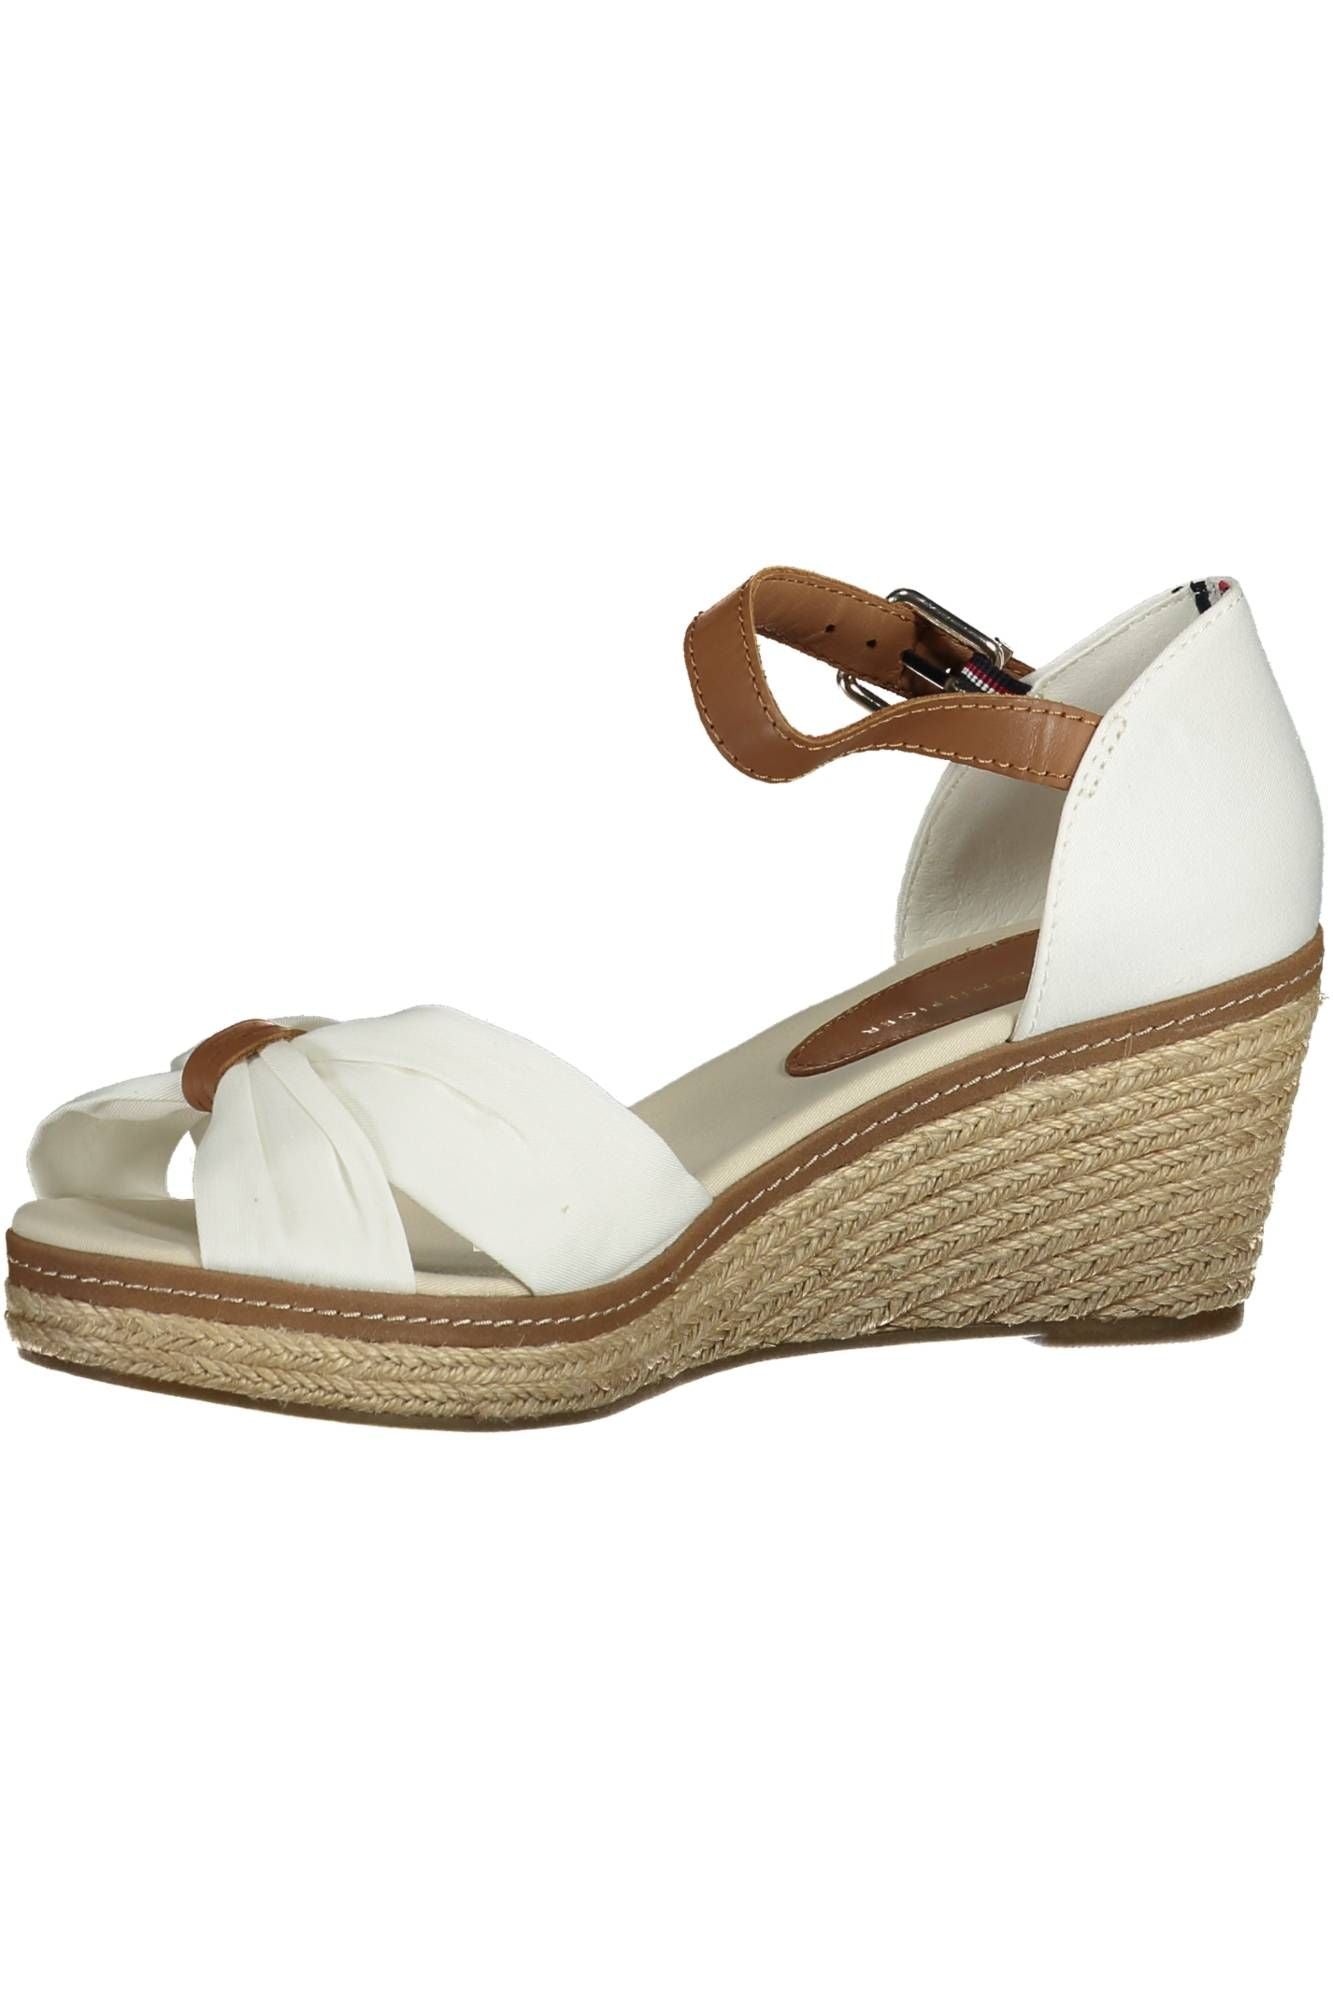 Chic Embroidered Wedge Sandals With Ankle Lace